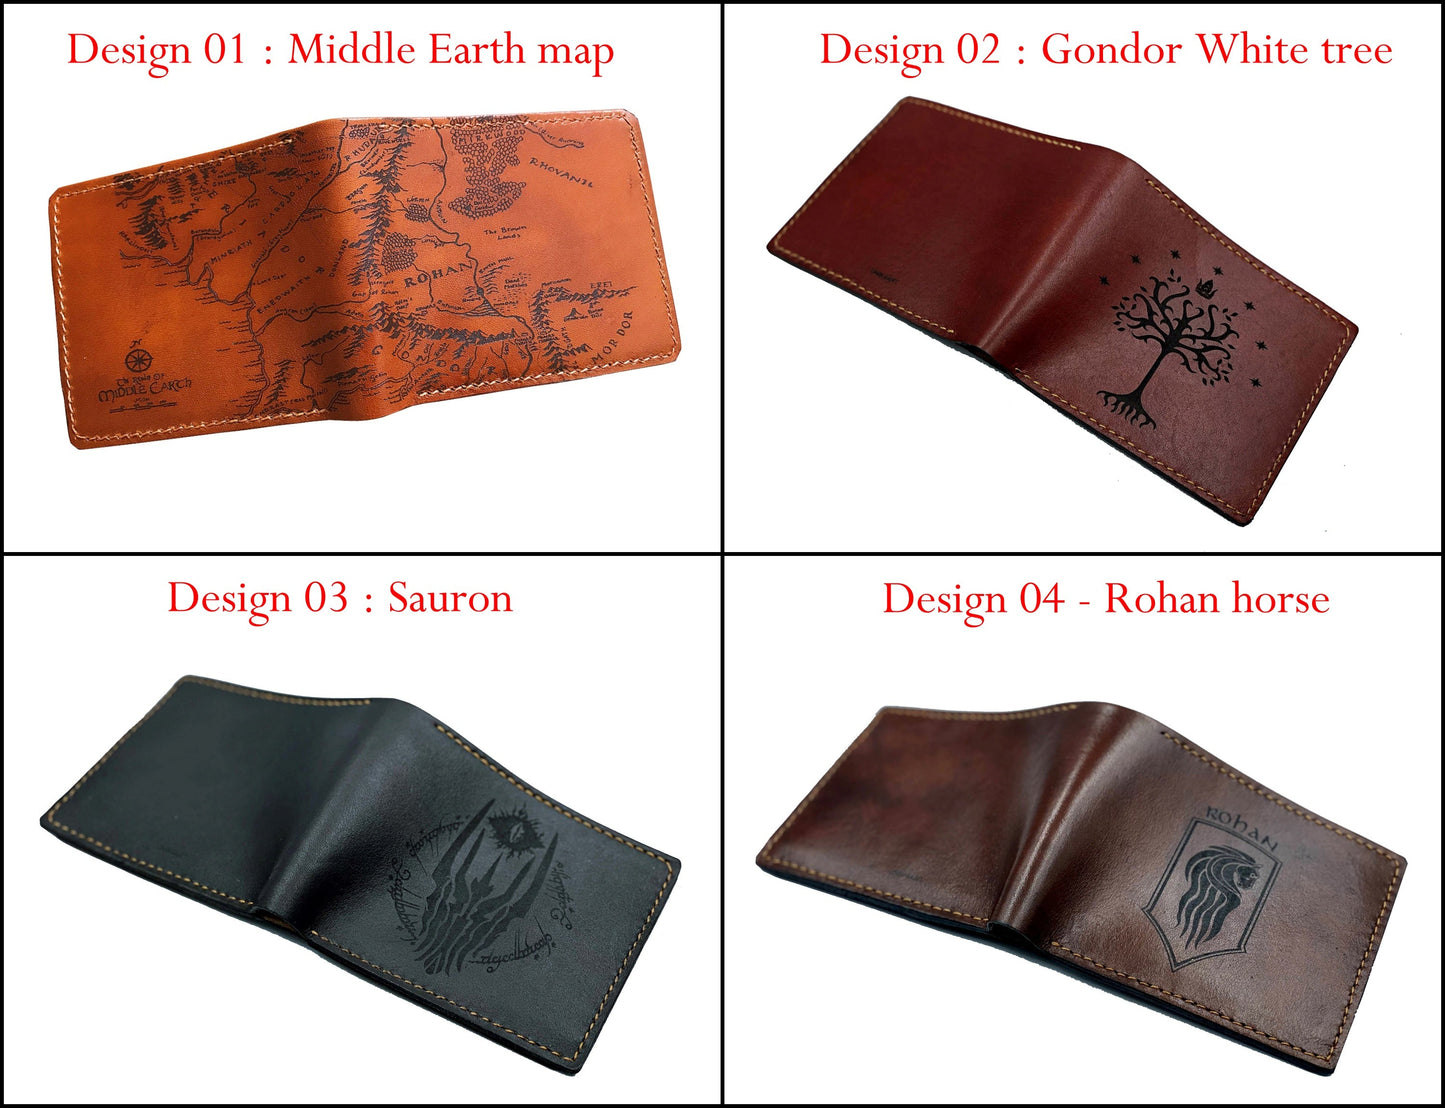 Mayan Corner - Personalized leather handmade wallet, The Lord of the Rings wallet, Sauron eye leather art, lord of the rings leather gift for dad, birthday gift idea for husband, boyfriend